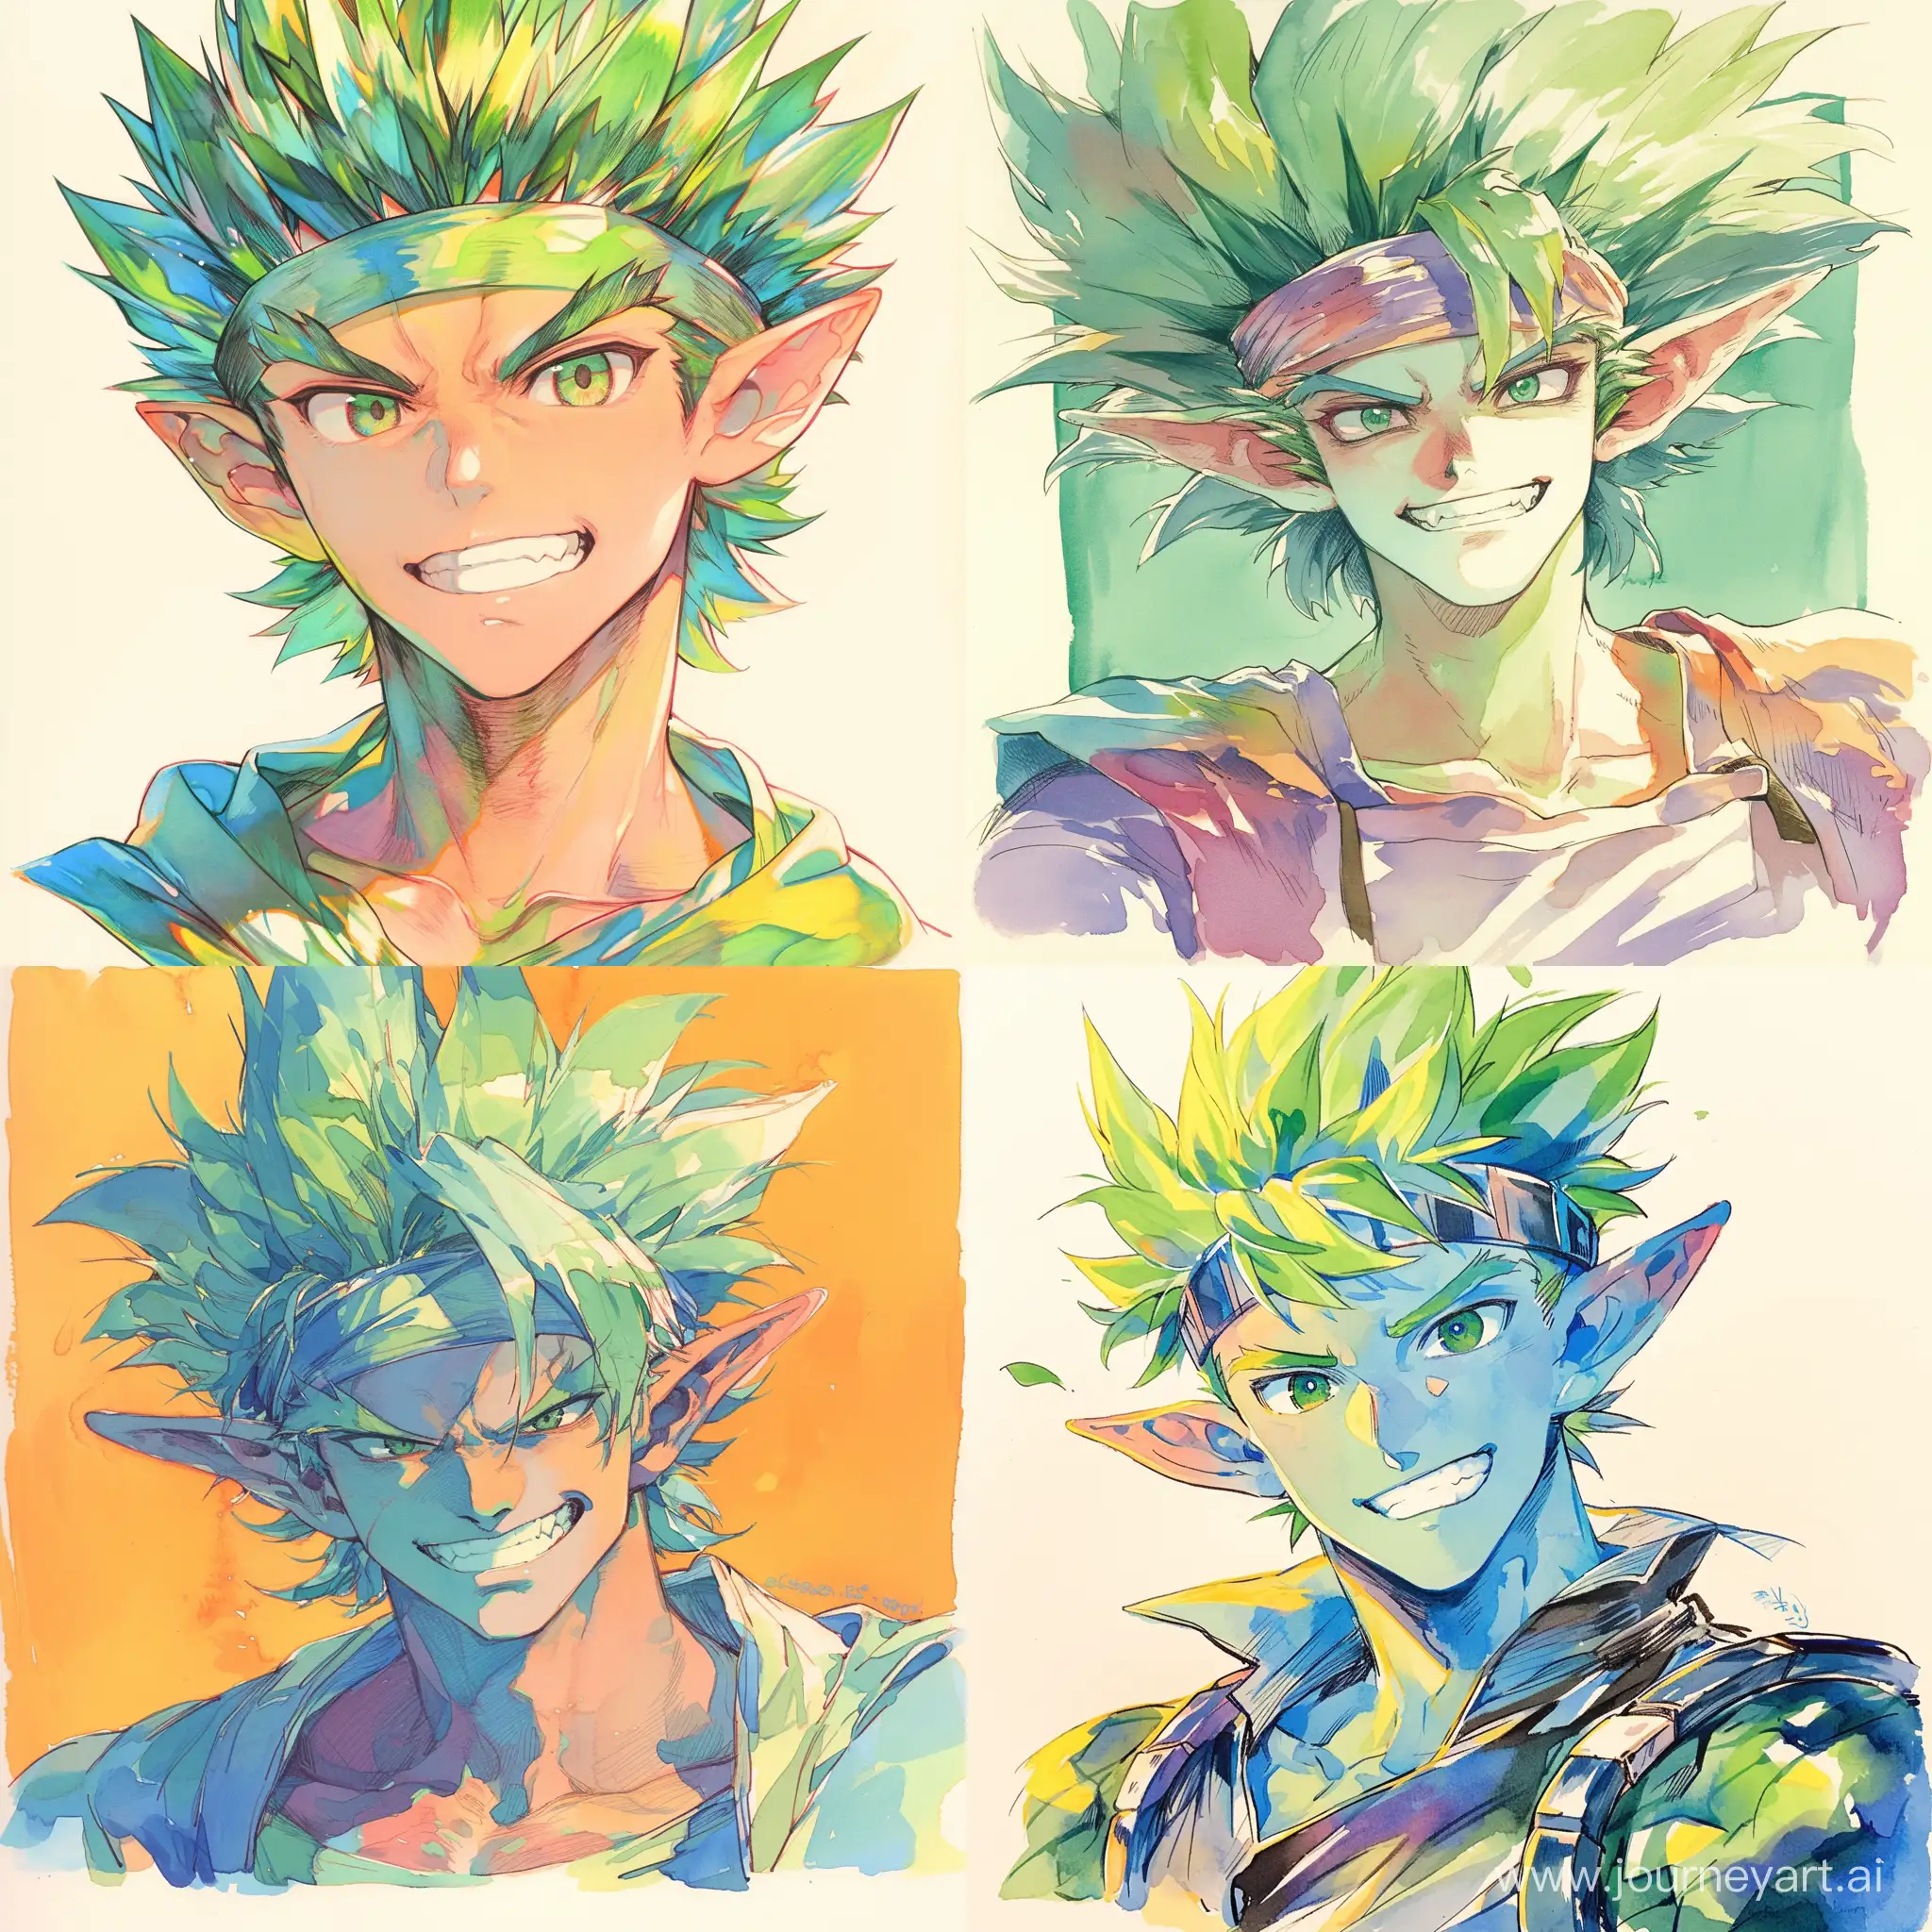 Cheerful-GreenHaired-Boy-with-Pointy-Ears-Smiling-in-Traditional-Portrait